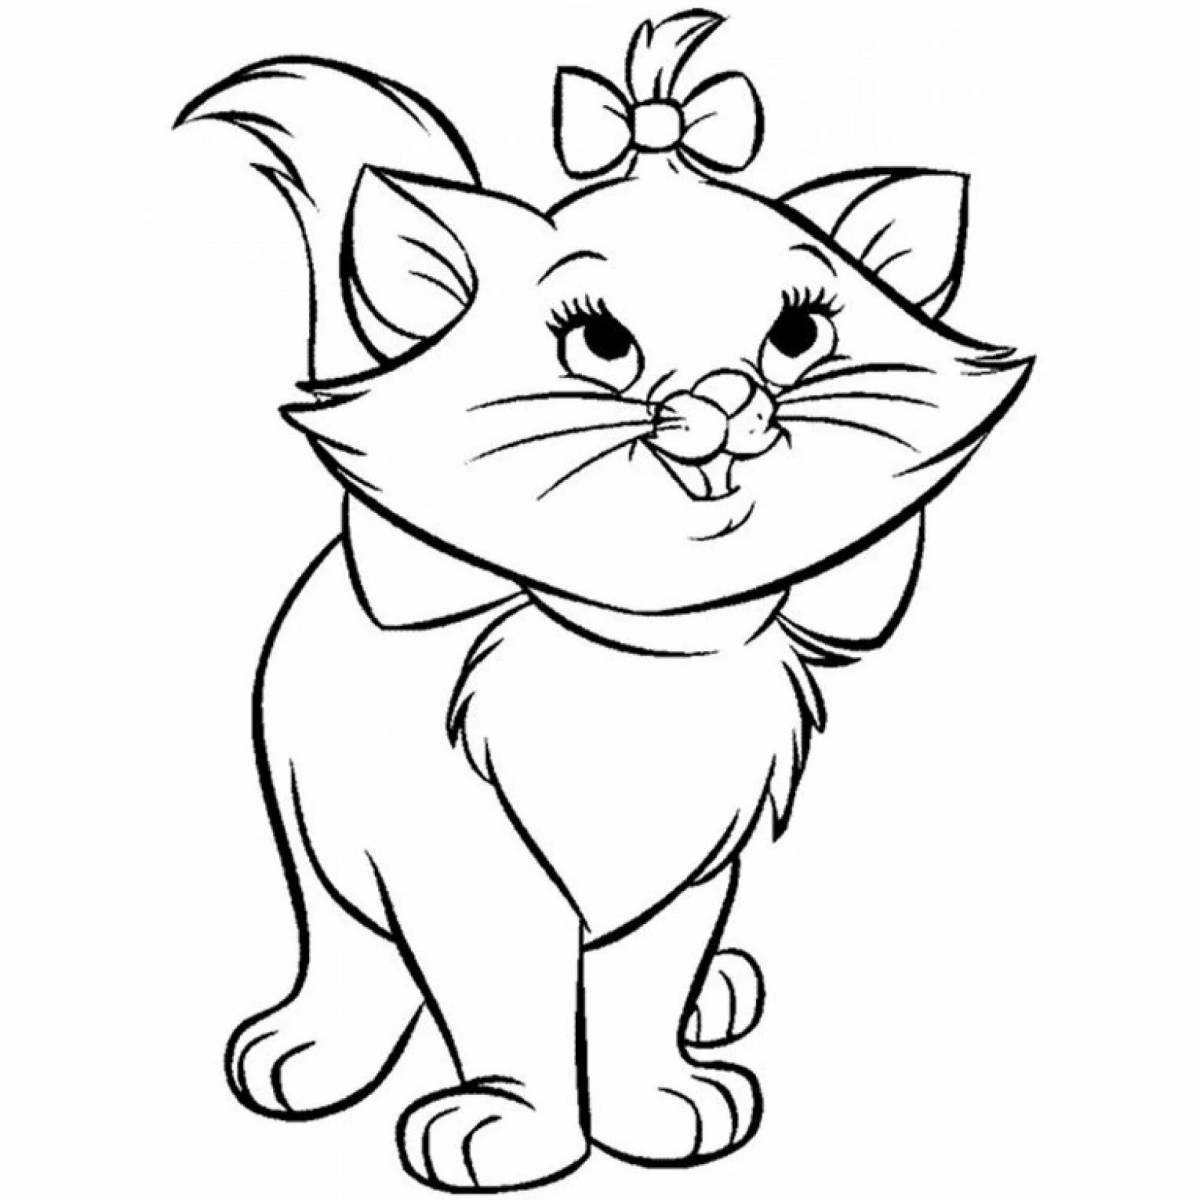 Great kote coloring book for kids